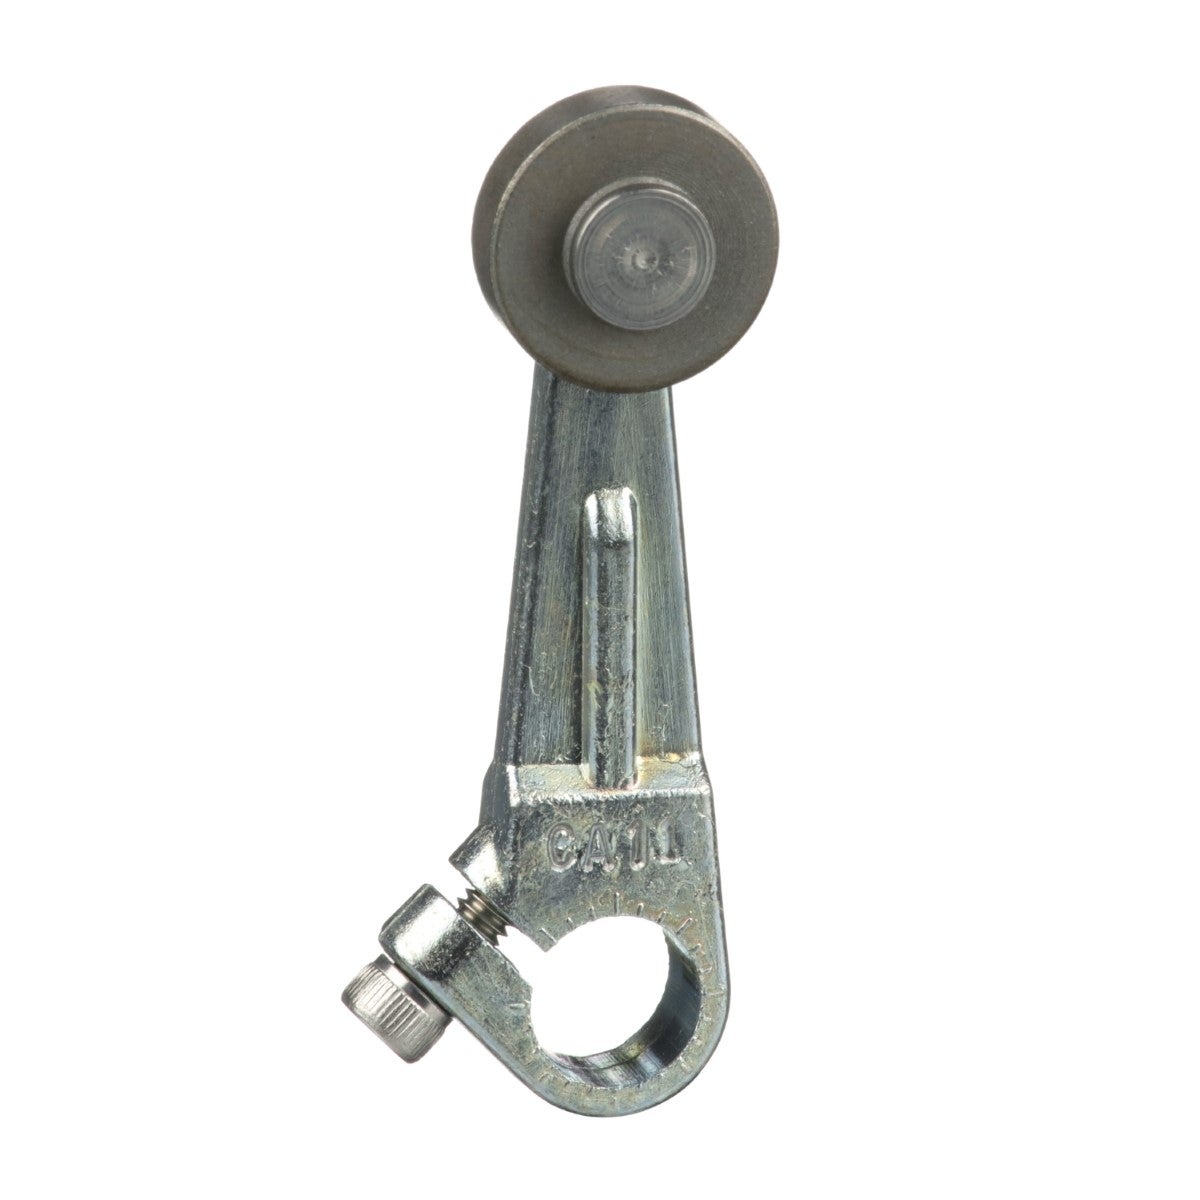 Limit switch lever, 9007, arm 2in c